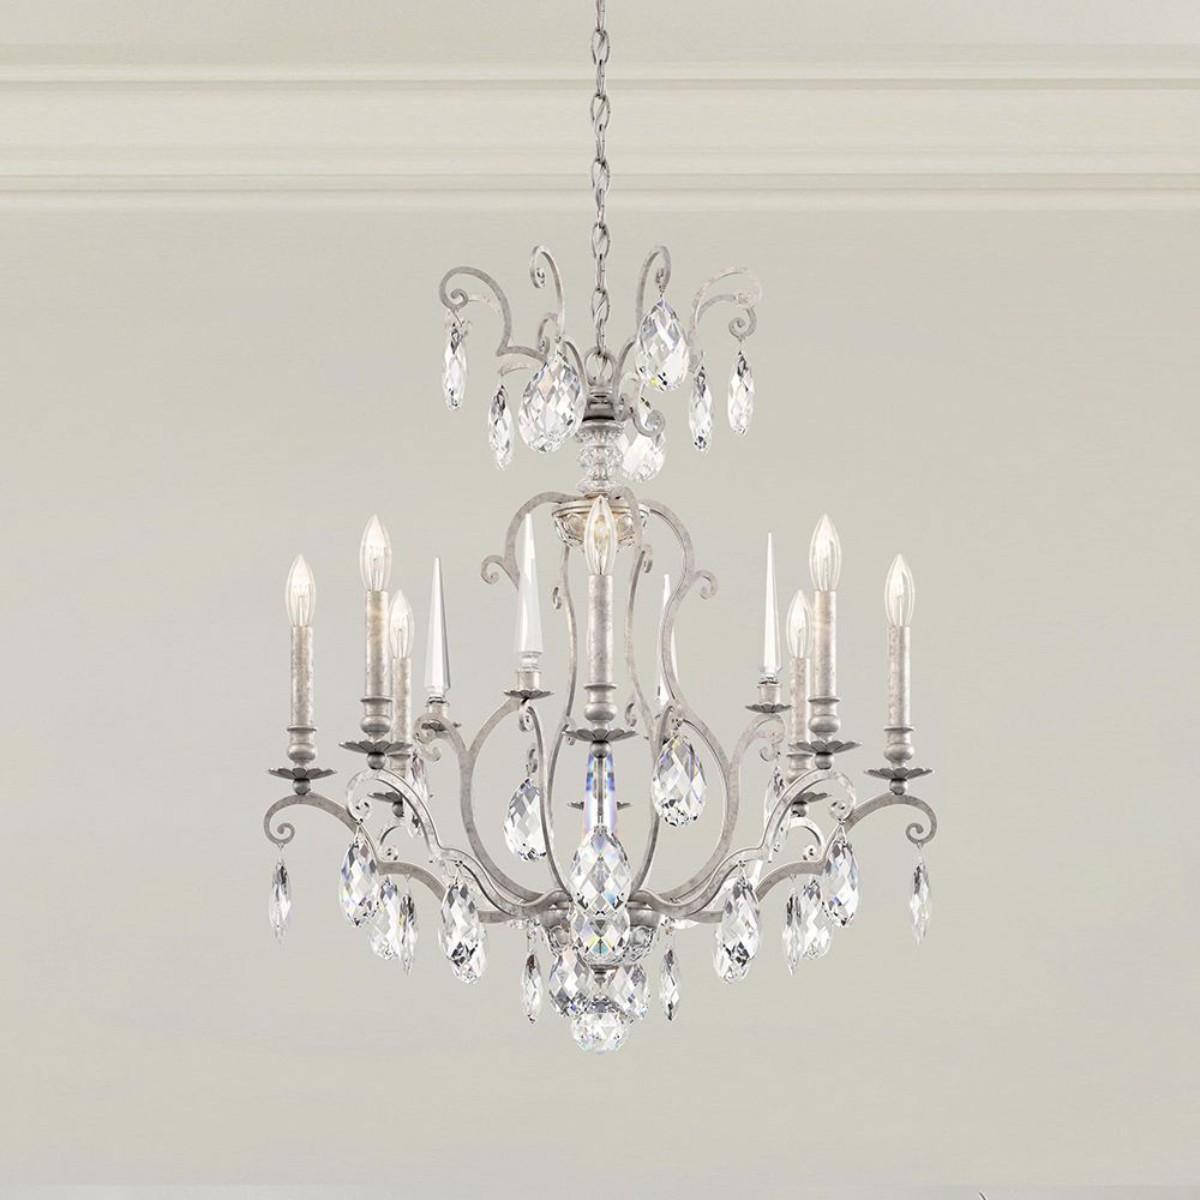 Renaissance Nouveau 8 Light Chandelier with Heritage Crystal - Bees Lighting